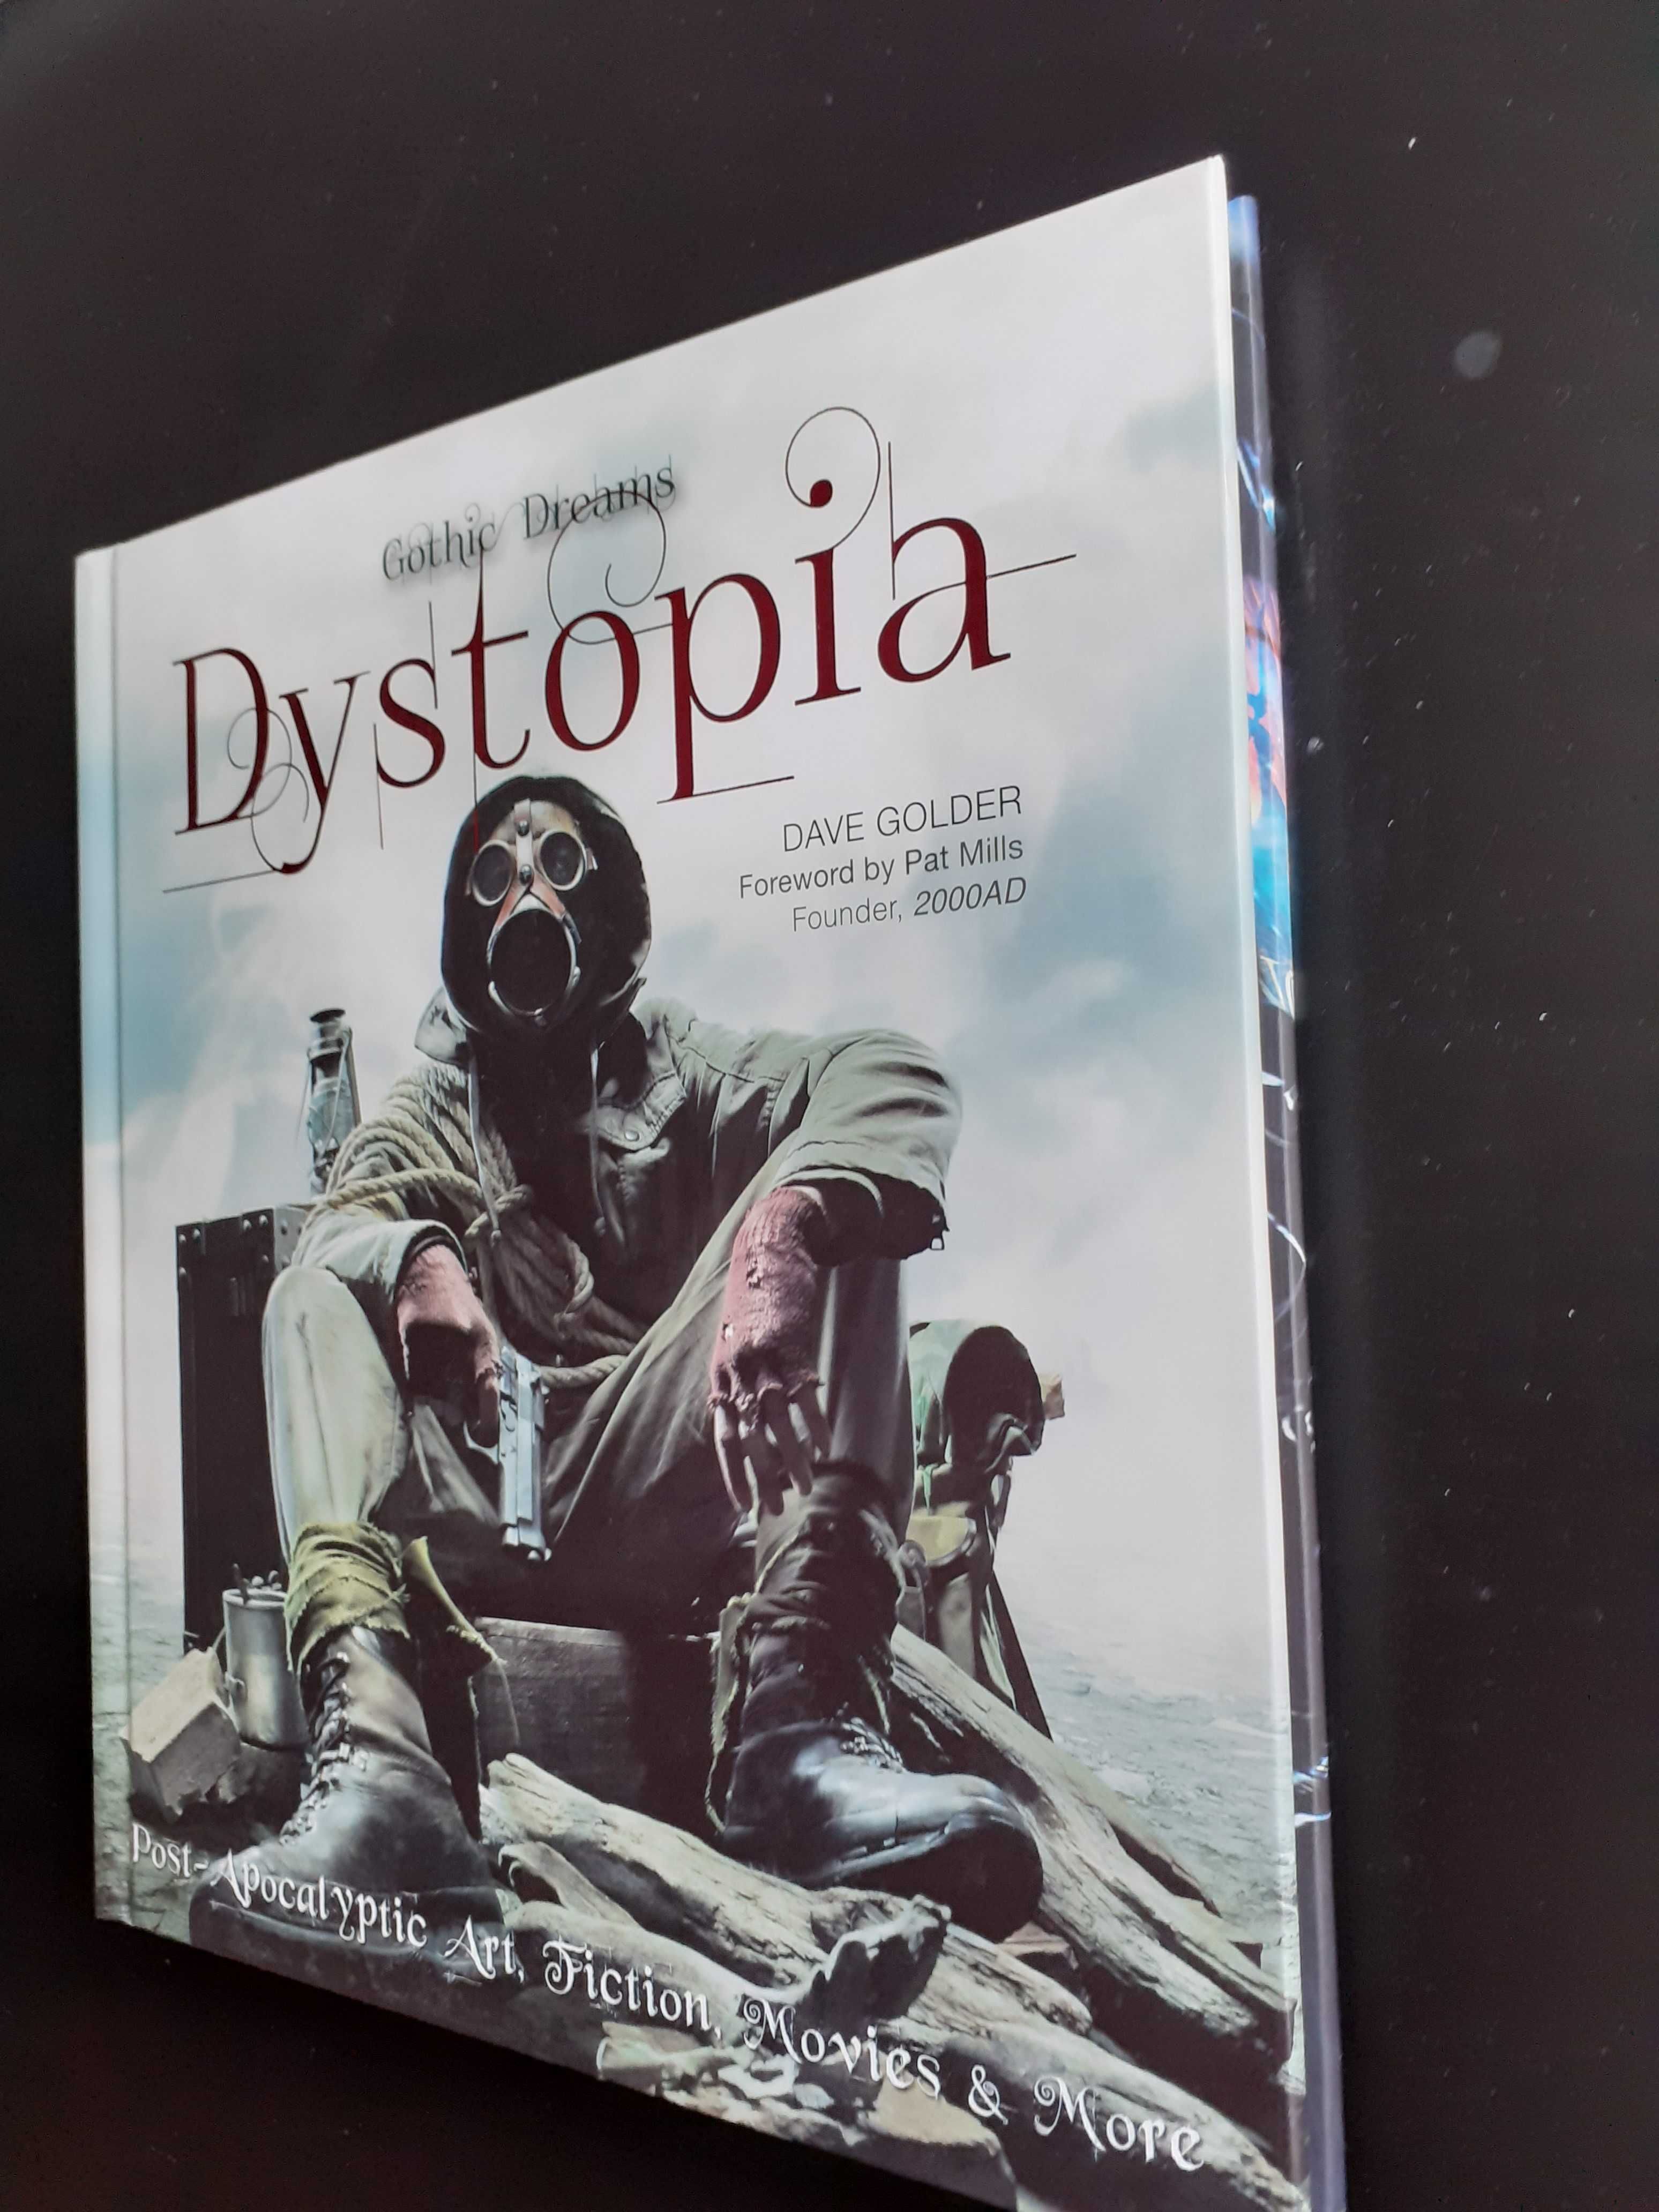 Dave Golder - Dystopia. Gothic Dreams. Post-Apocalyptic art, movies...